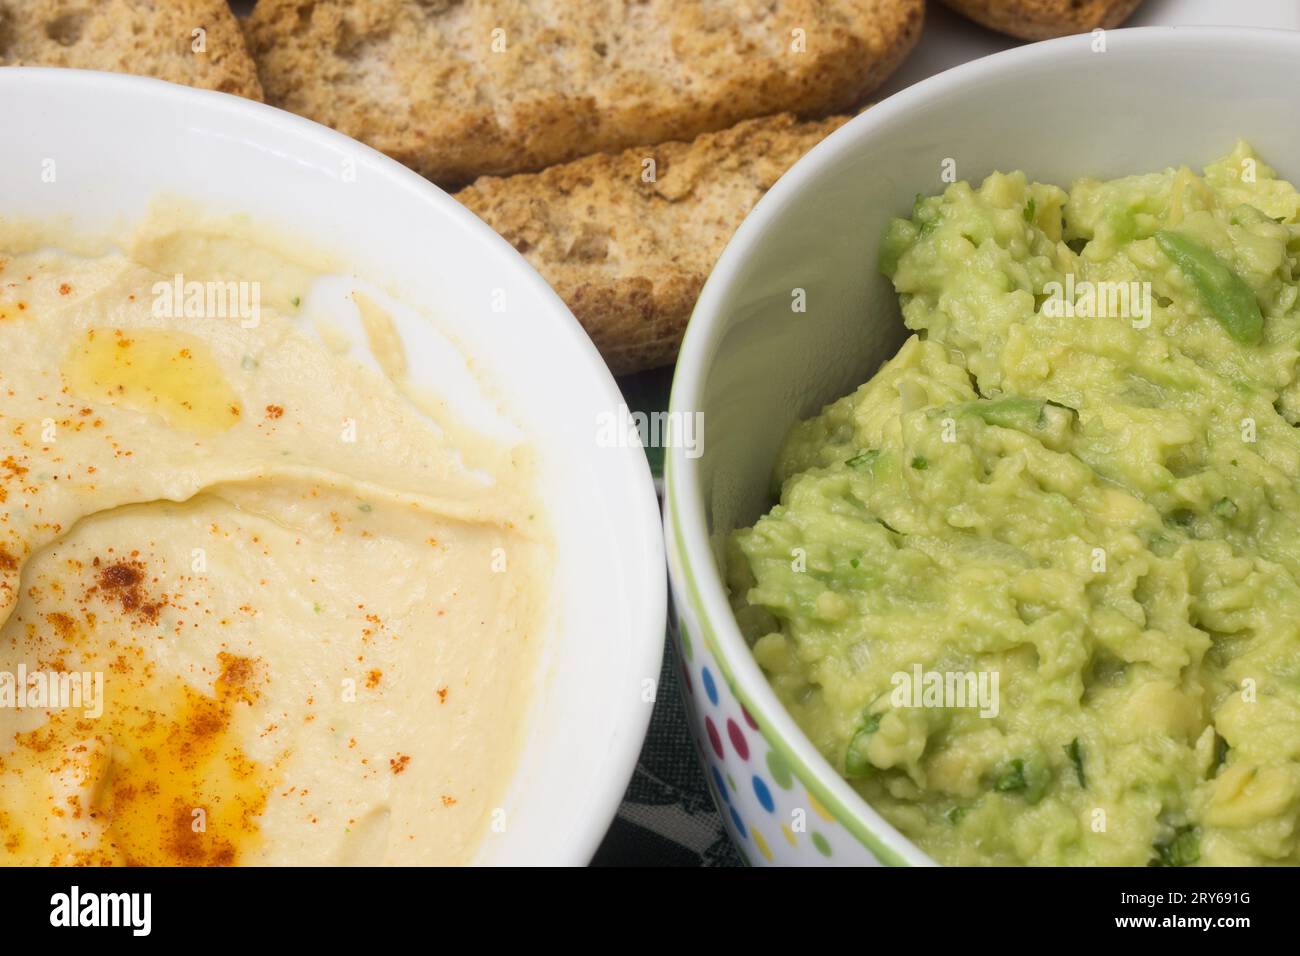 A very close-up shot of two bowls of dip, one with hummus and one with guacamole, both made with fresh ingredients. The breadsticks and toast are out Stock Photo